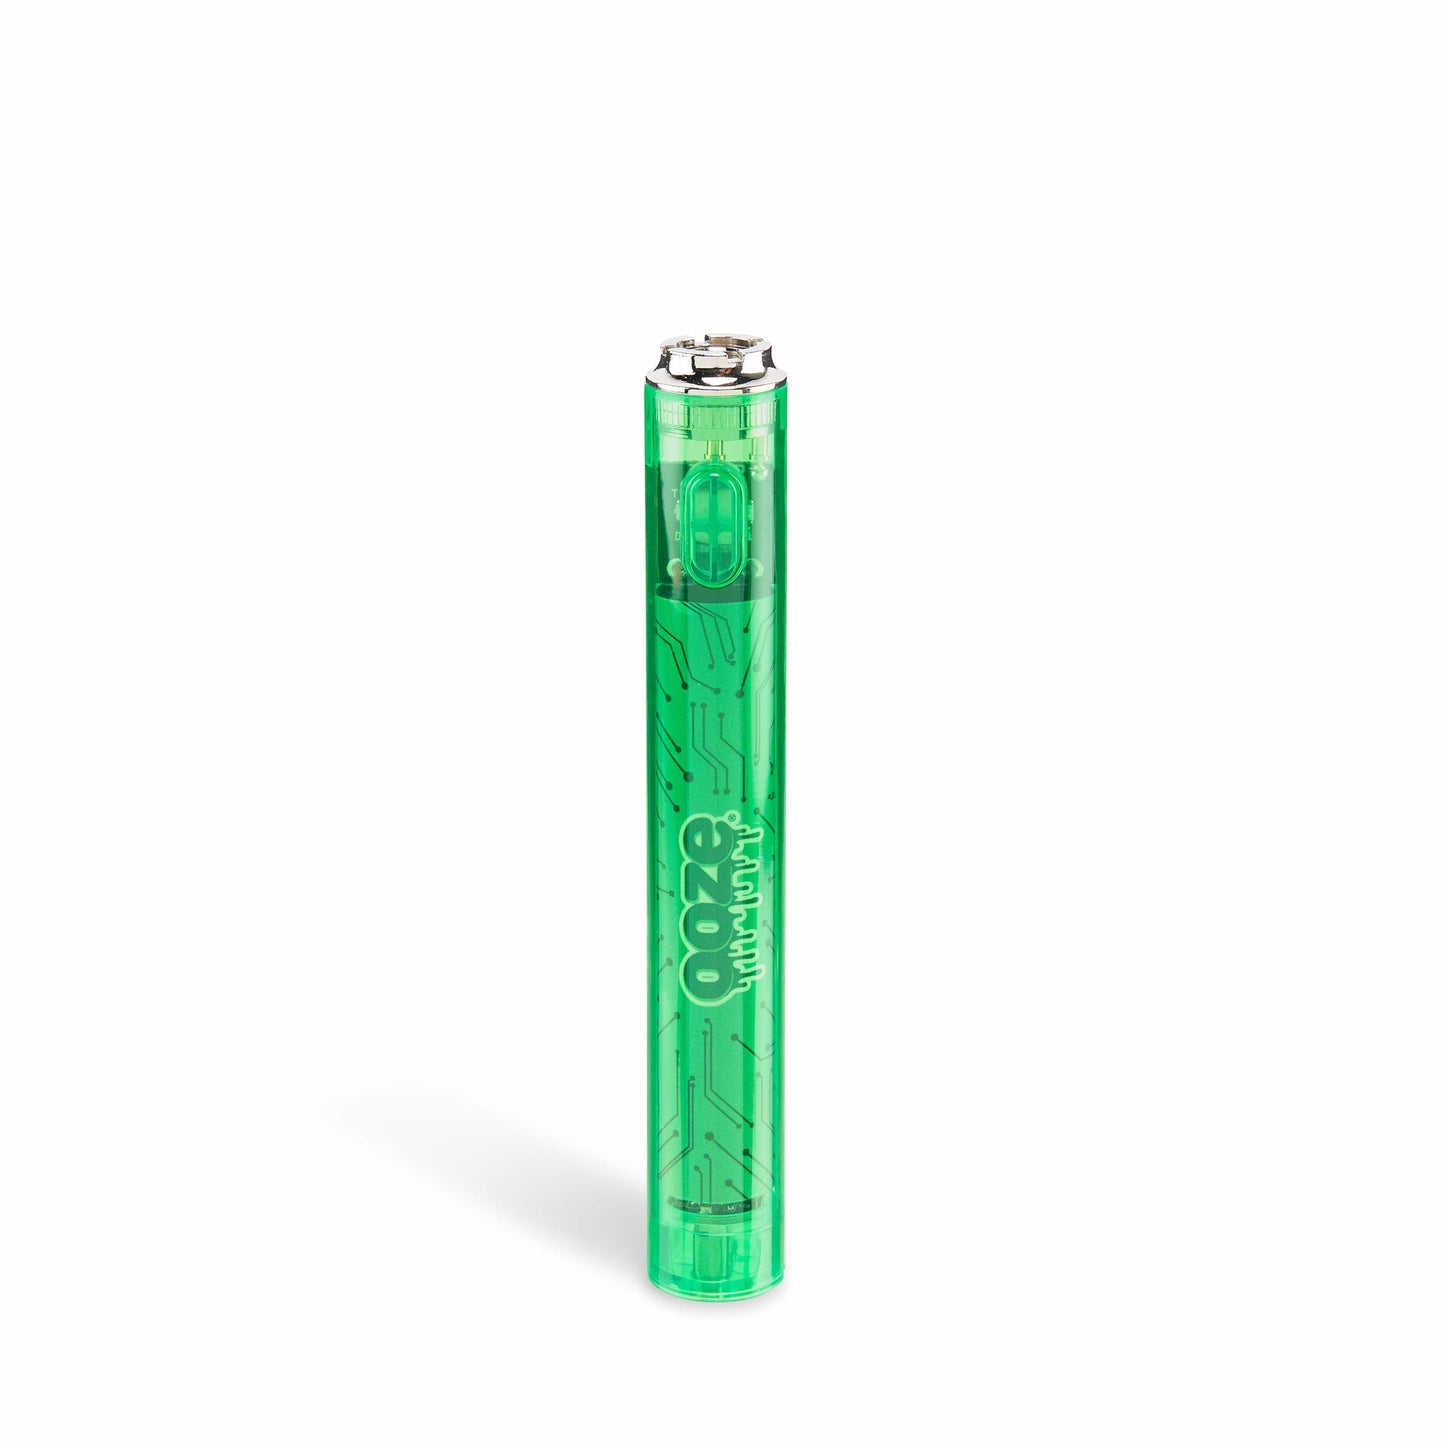 Ooze Batteries and Vapes Slime Green Slim Clear Series Transparent 510 Vape Battery